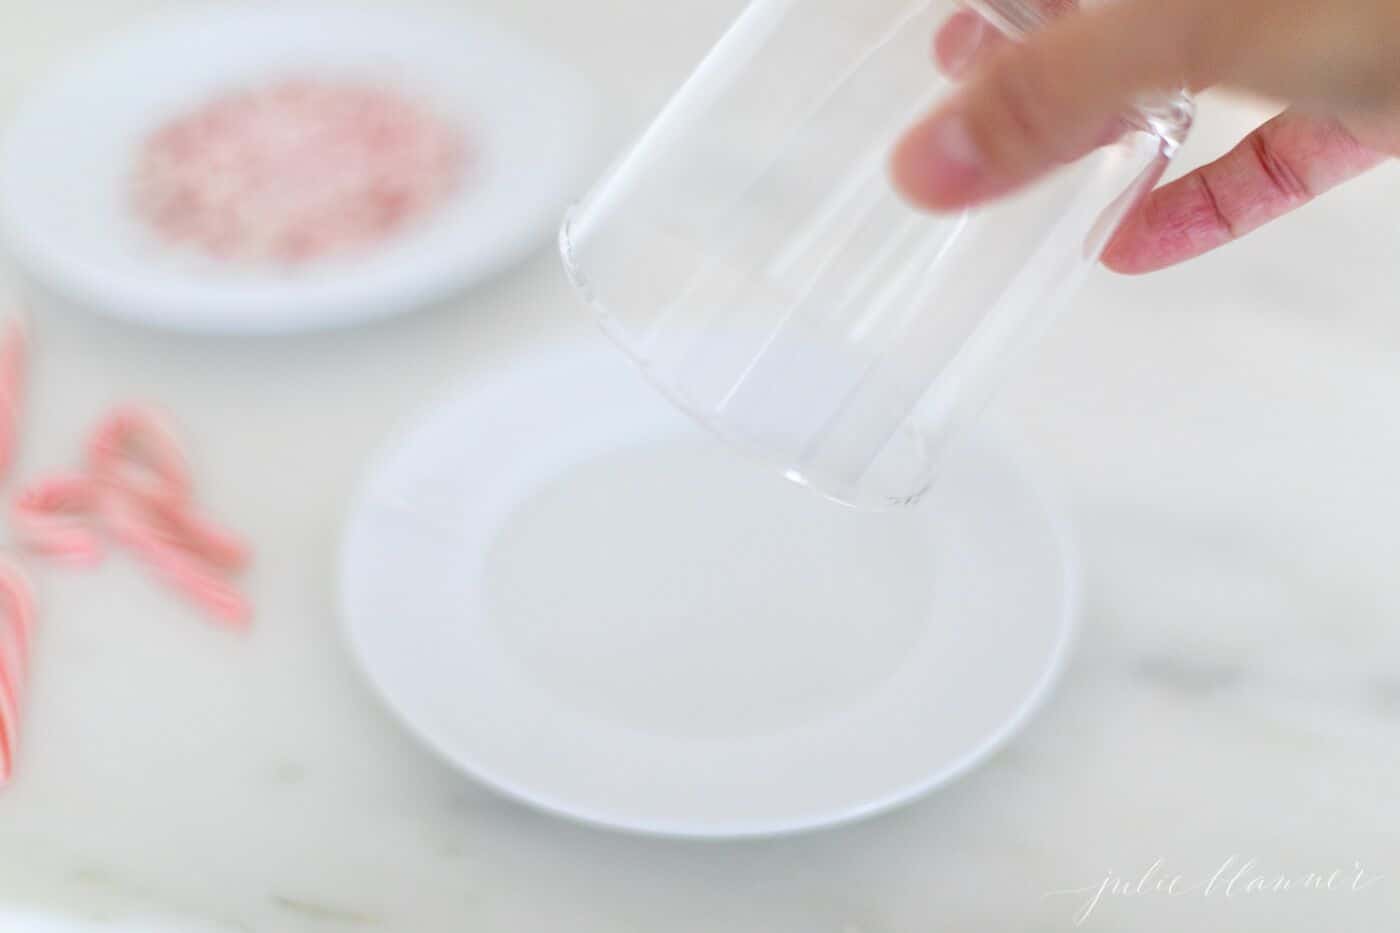 Clear glass dipping into simple syrup on a white plate for garnishing peppermint drinks.